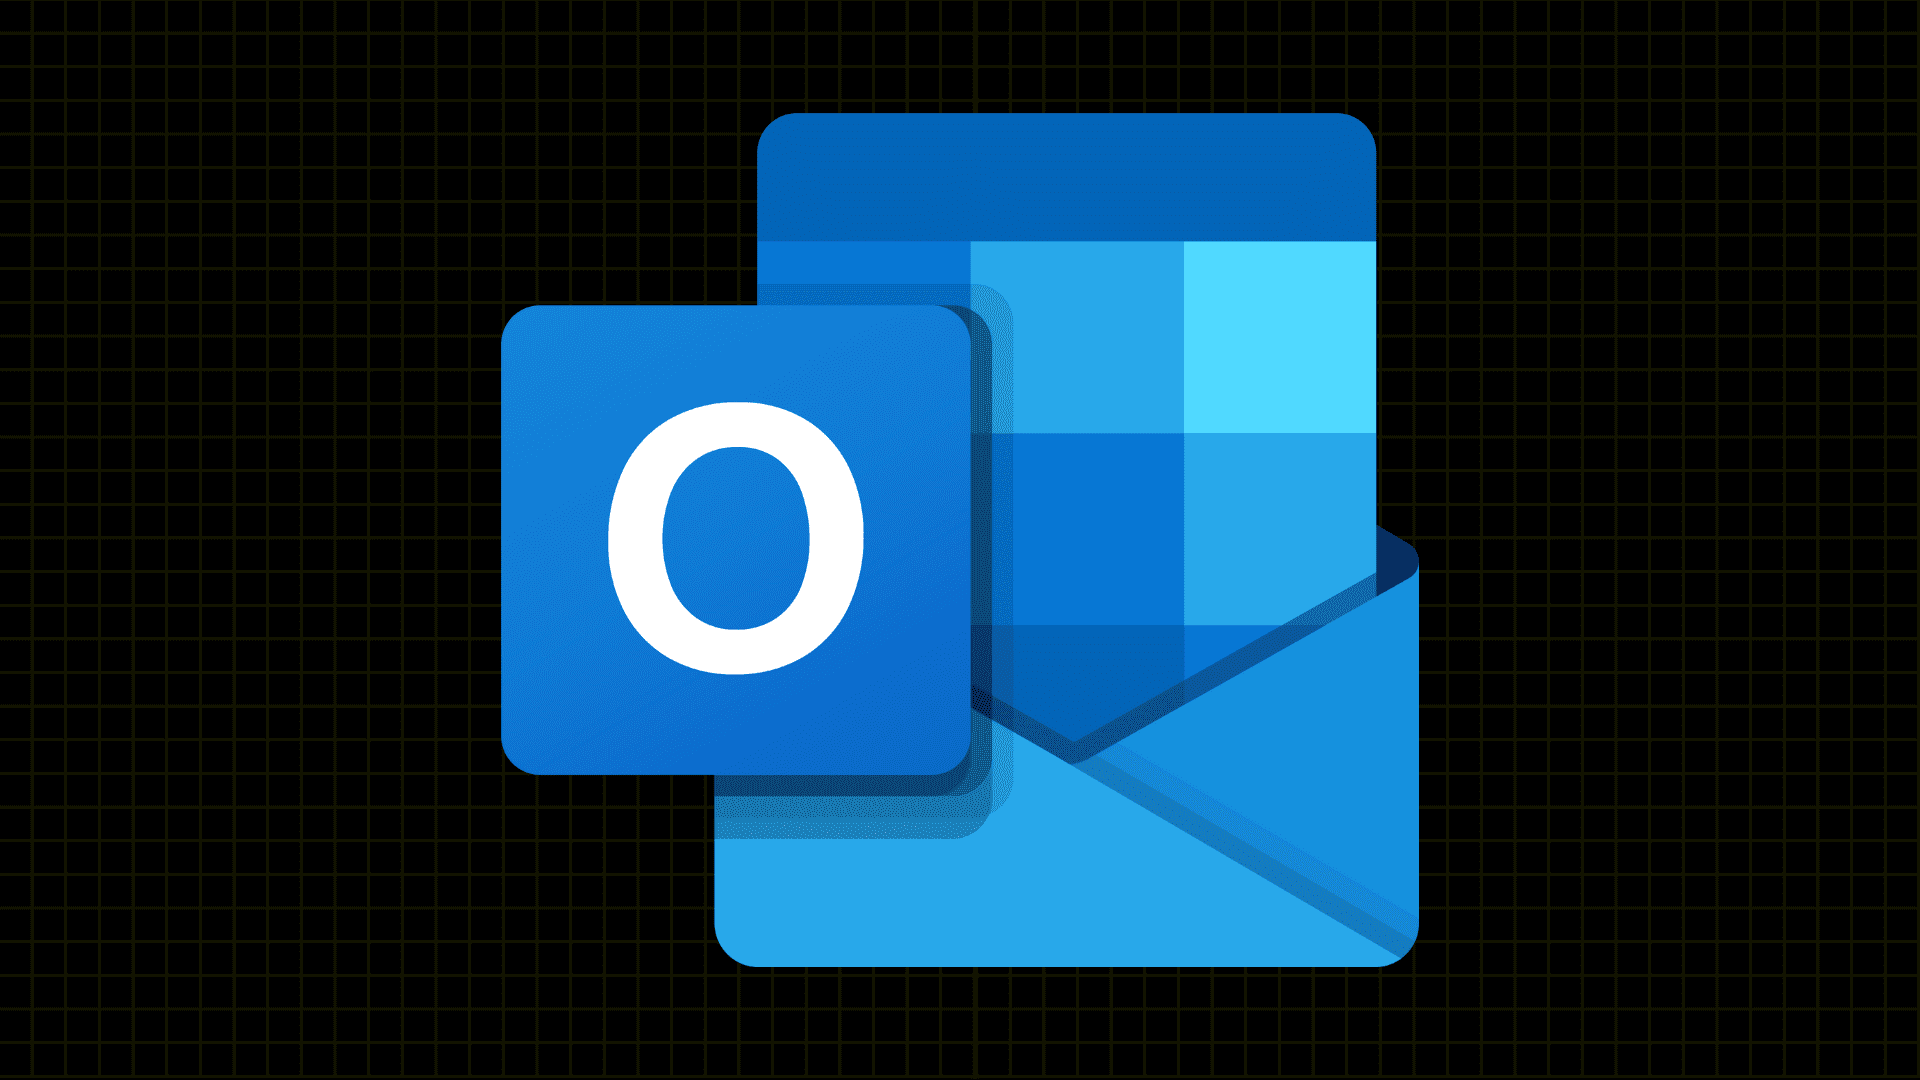 Outlook app icon on black background